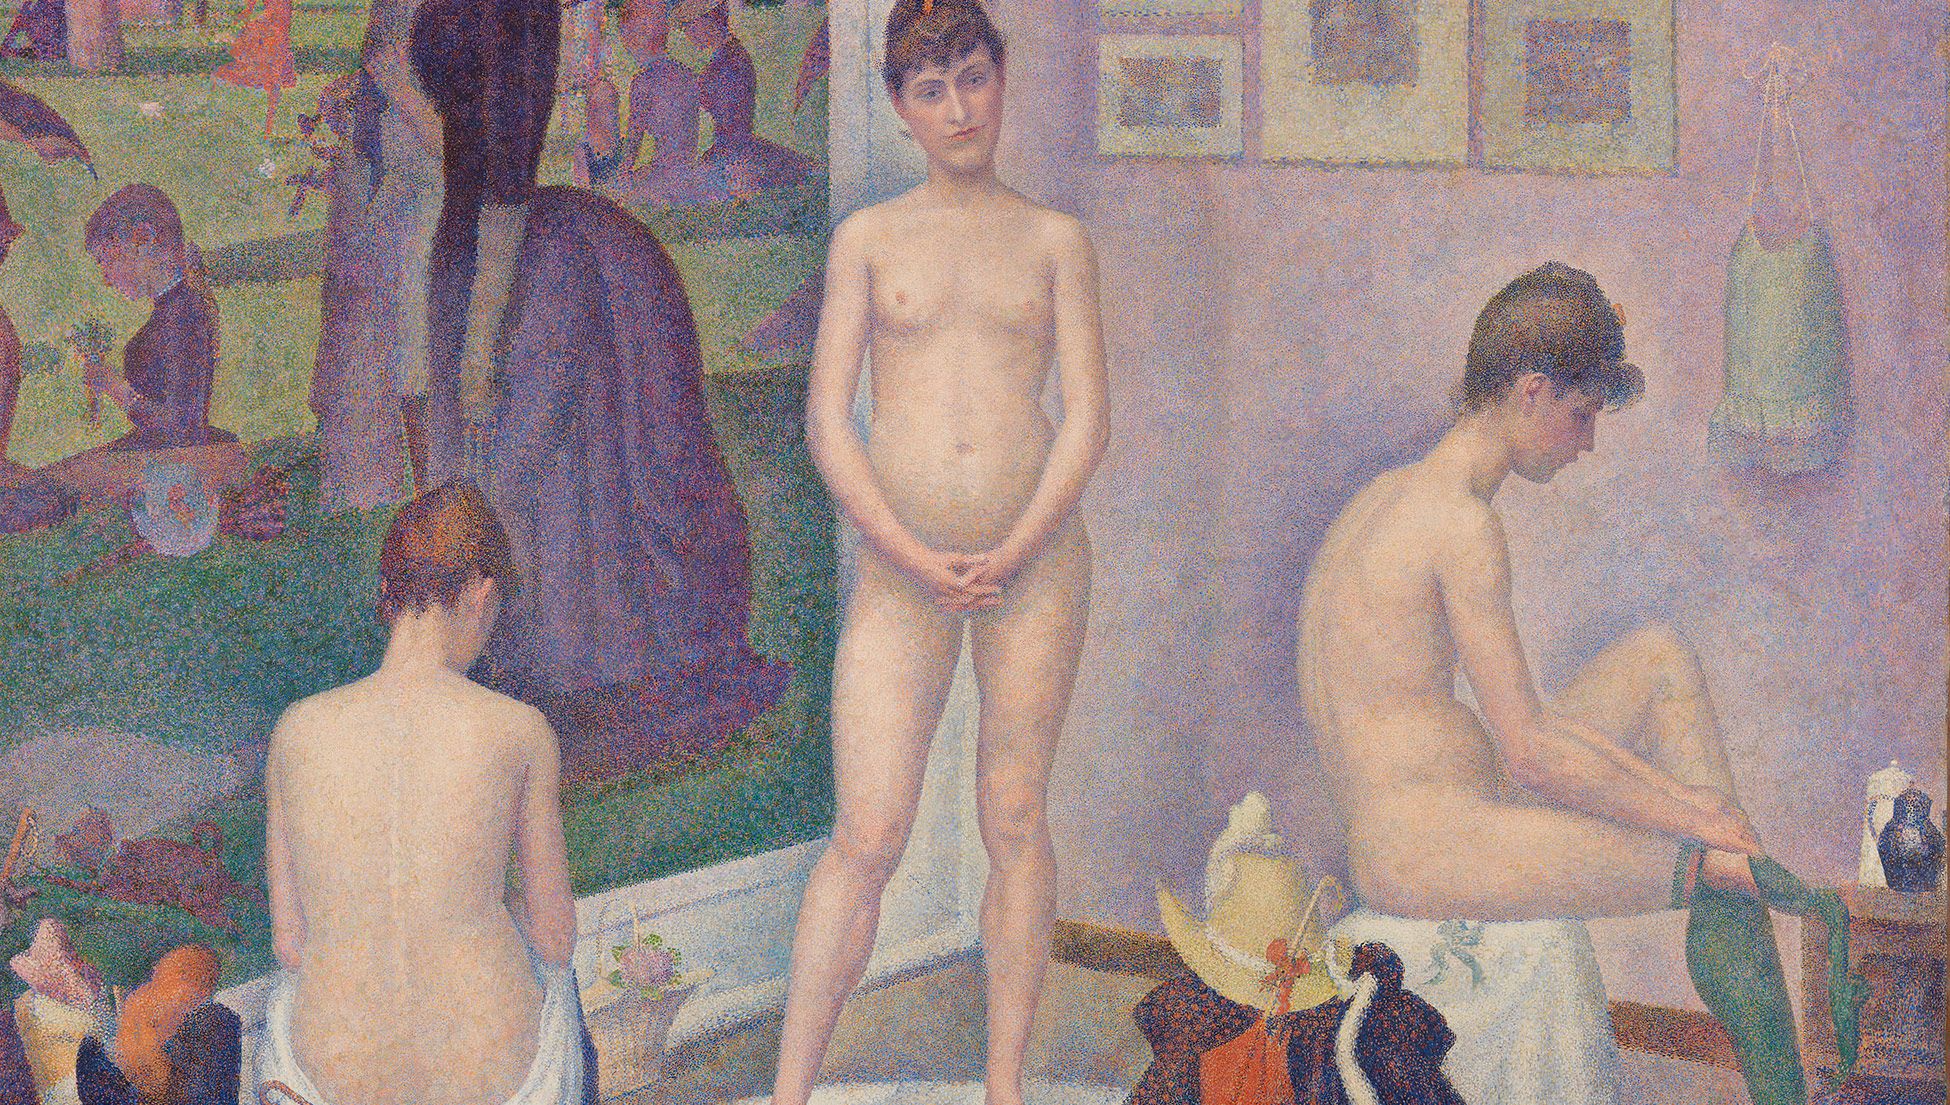 Painting by Seurat of a nude woman in three poses